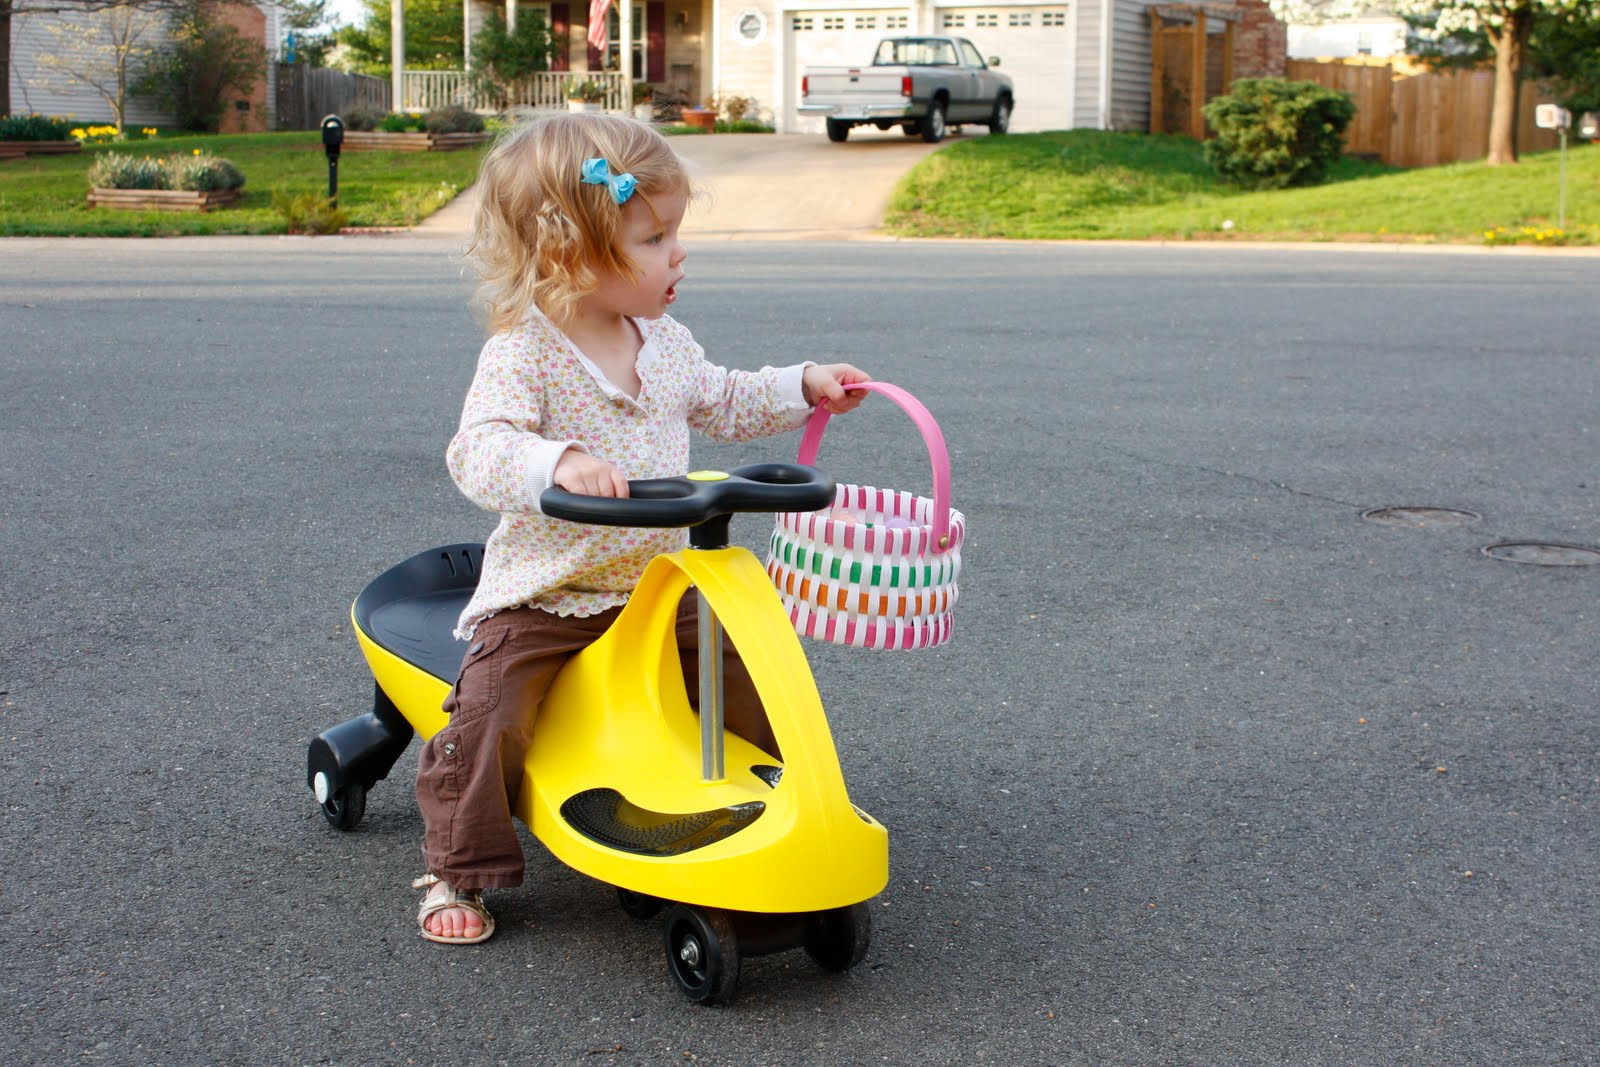 Cute Baby Wallpapers: Baby Riding Cycle